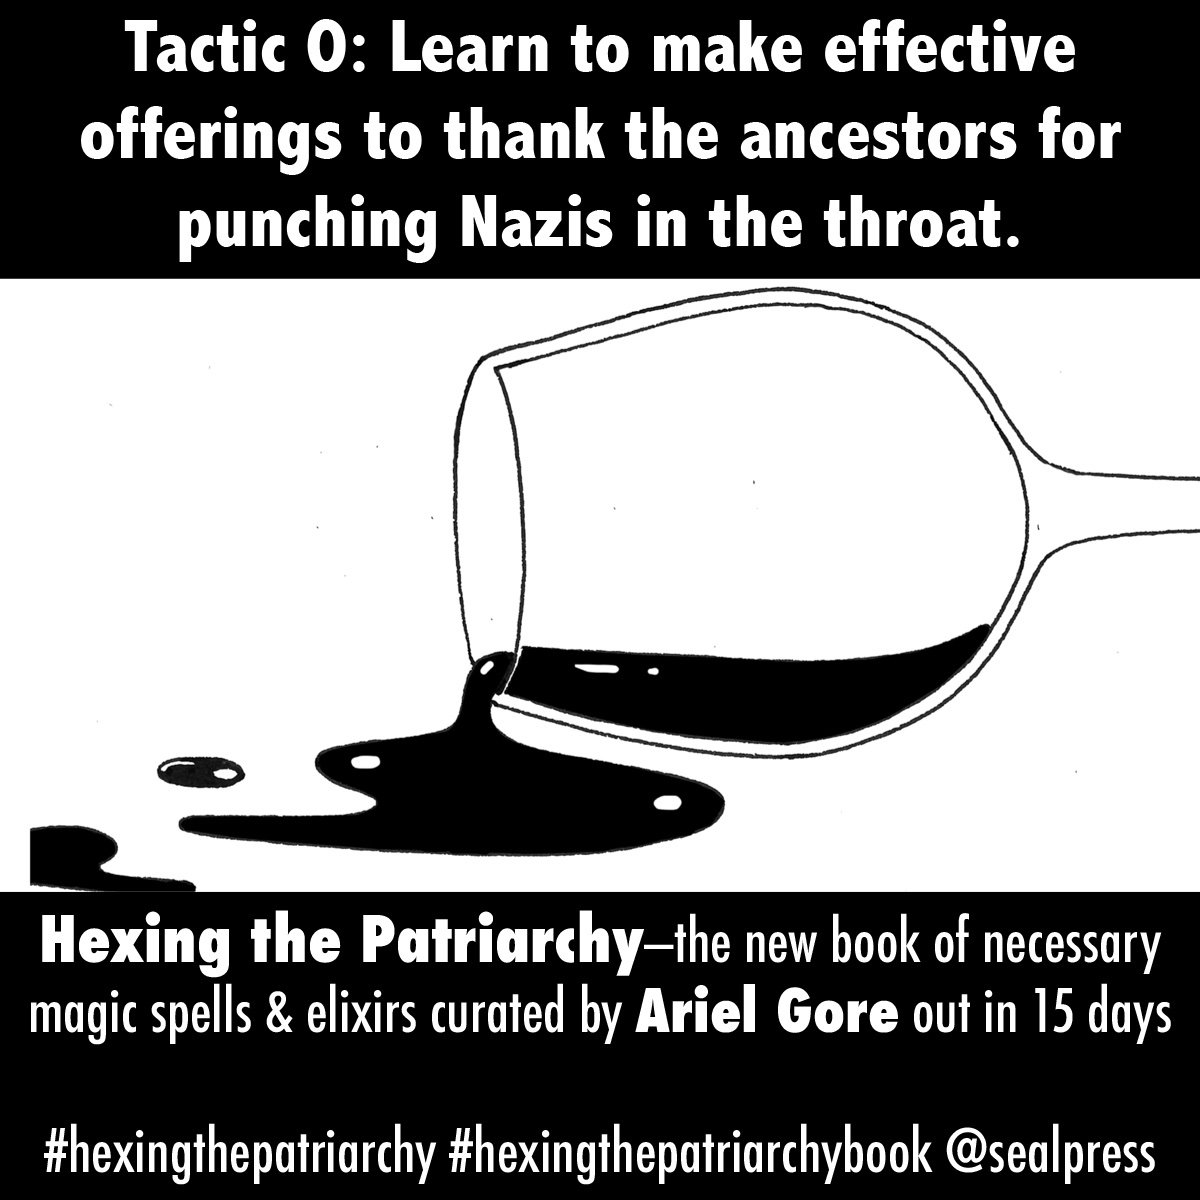 Learn all the witchy tactics in #hexingthepatriarchy. #hexthepatriarchy #magicalresistance #impeachment